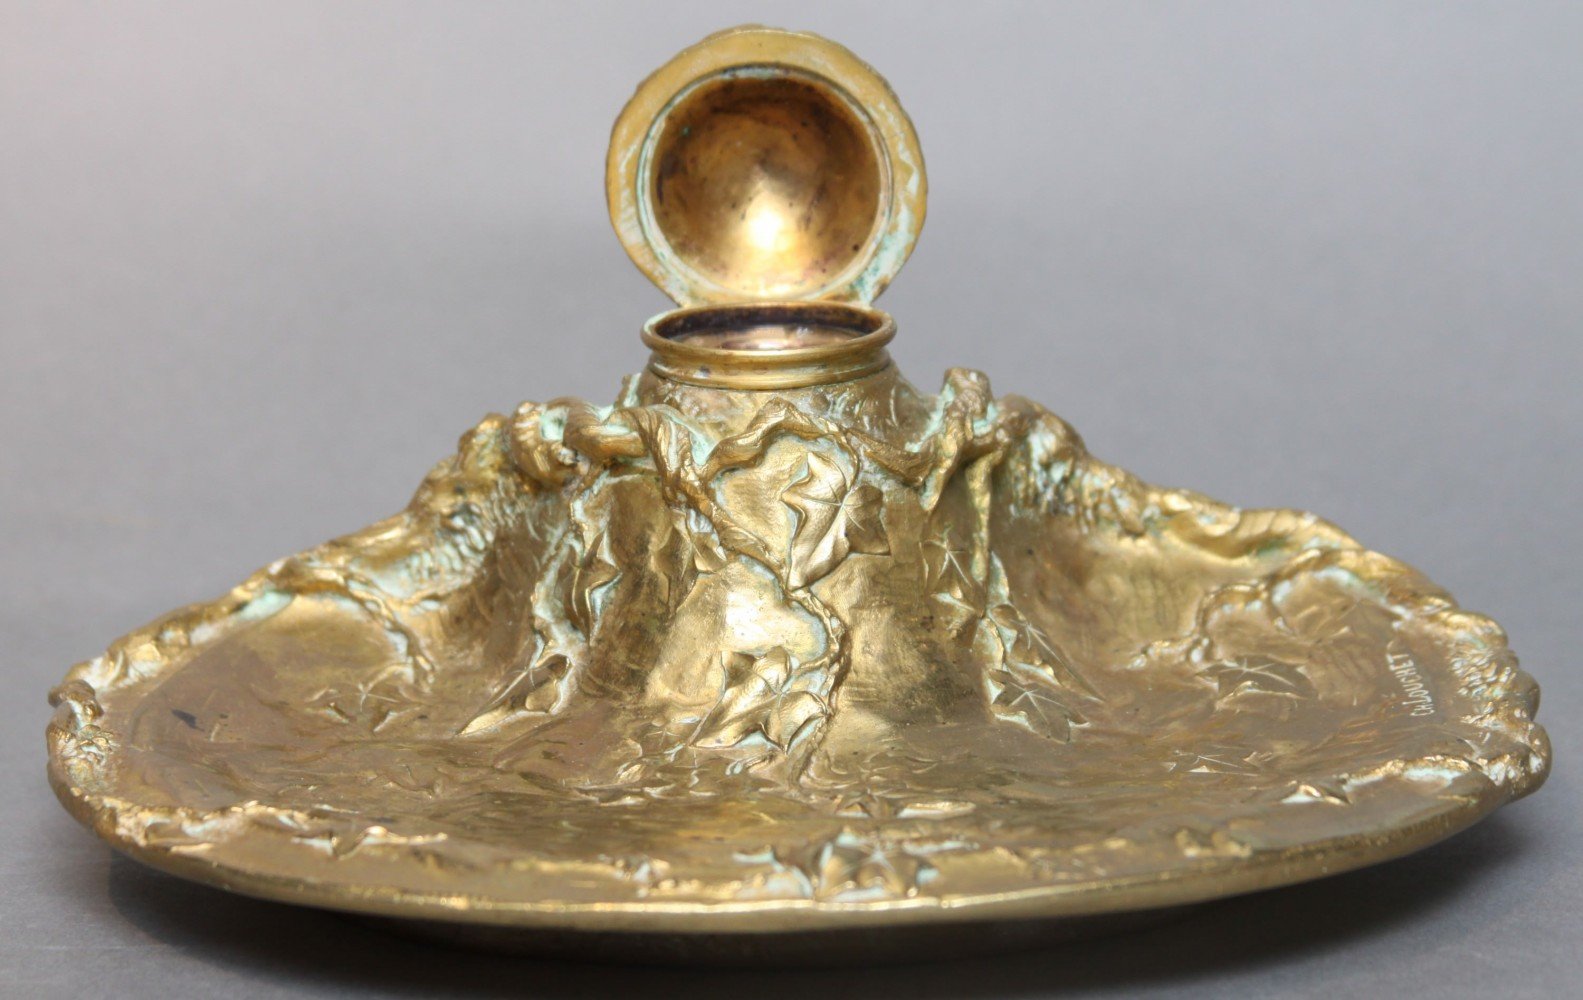 A Gilt Bronze Inkwell, Cast as an Ivy Covered Tree Stump by Charles Louchet